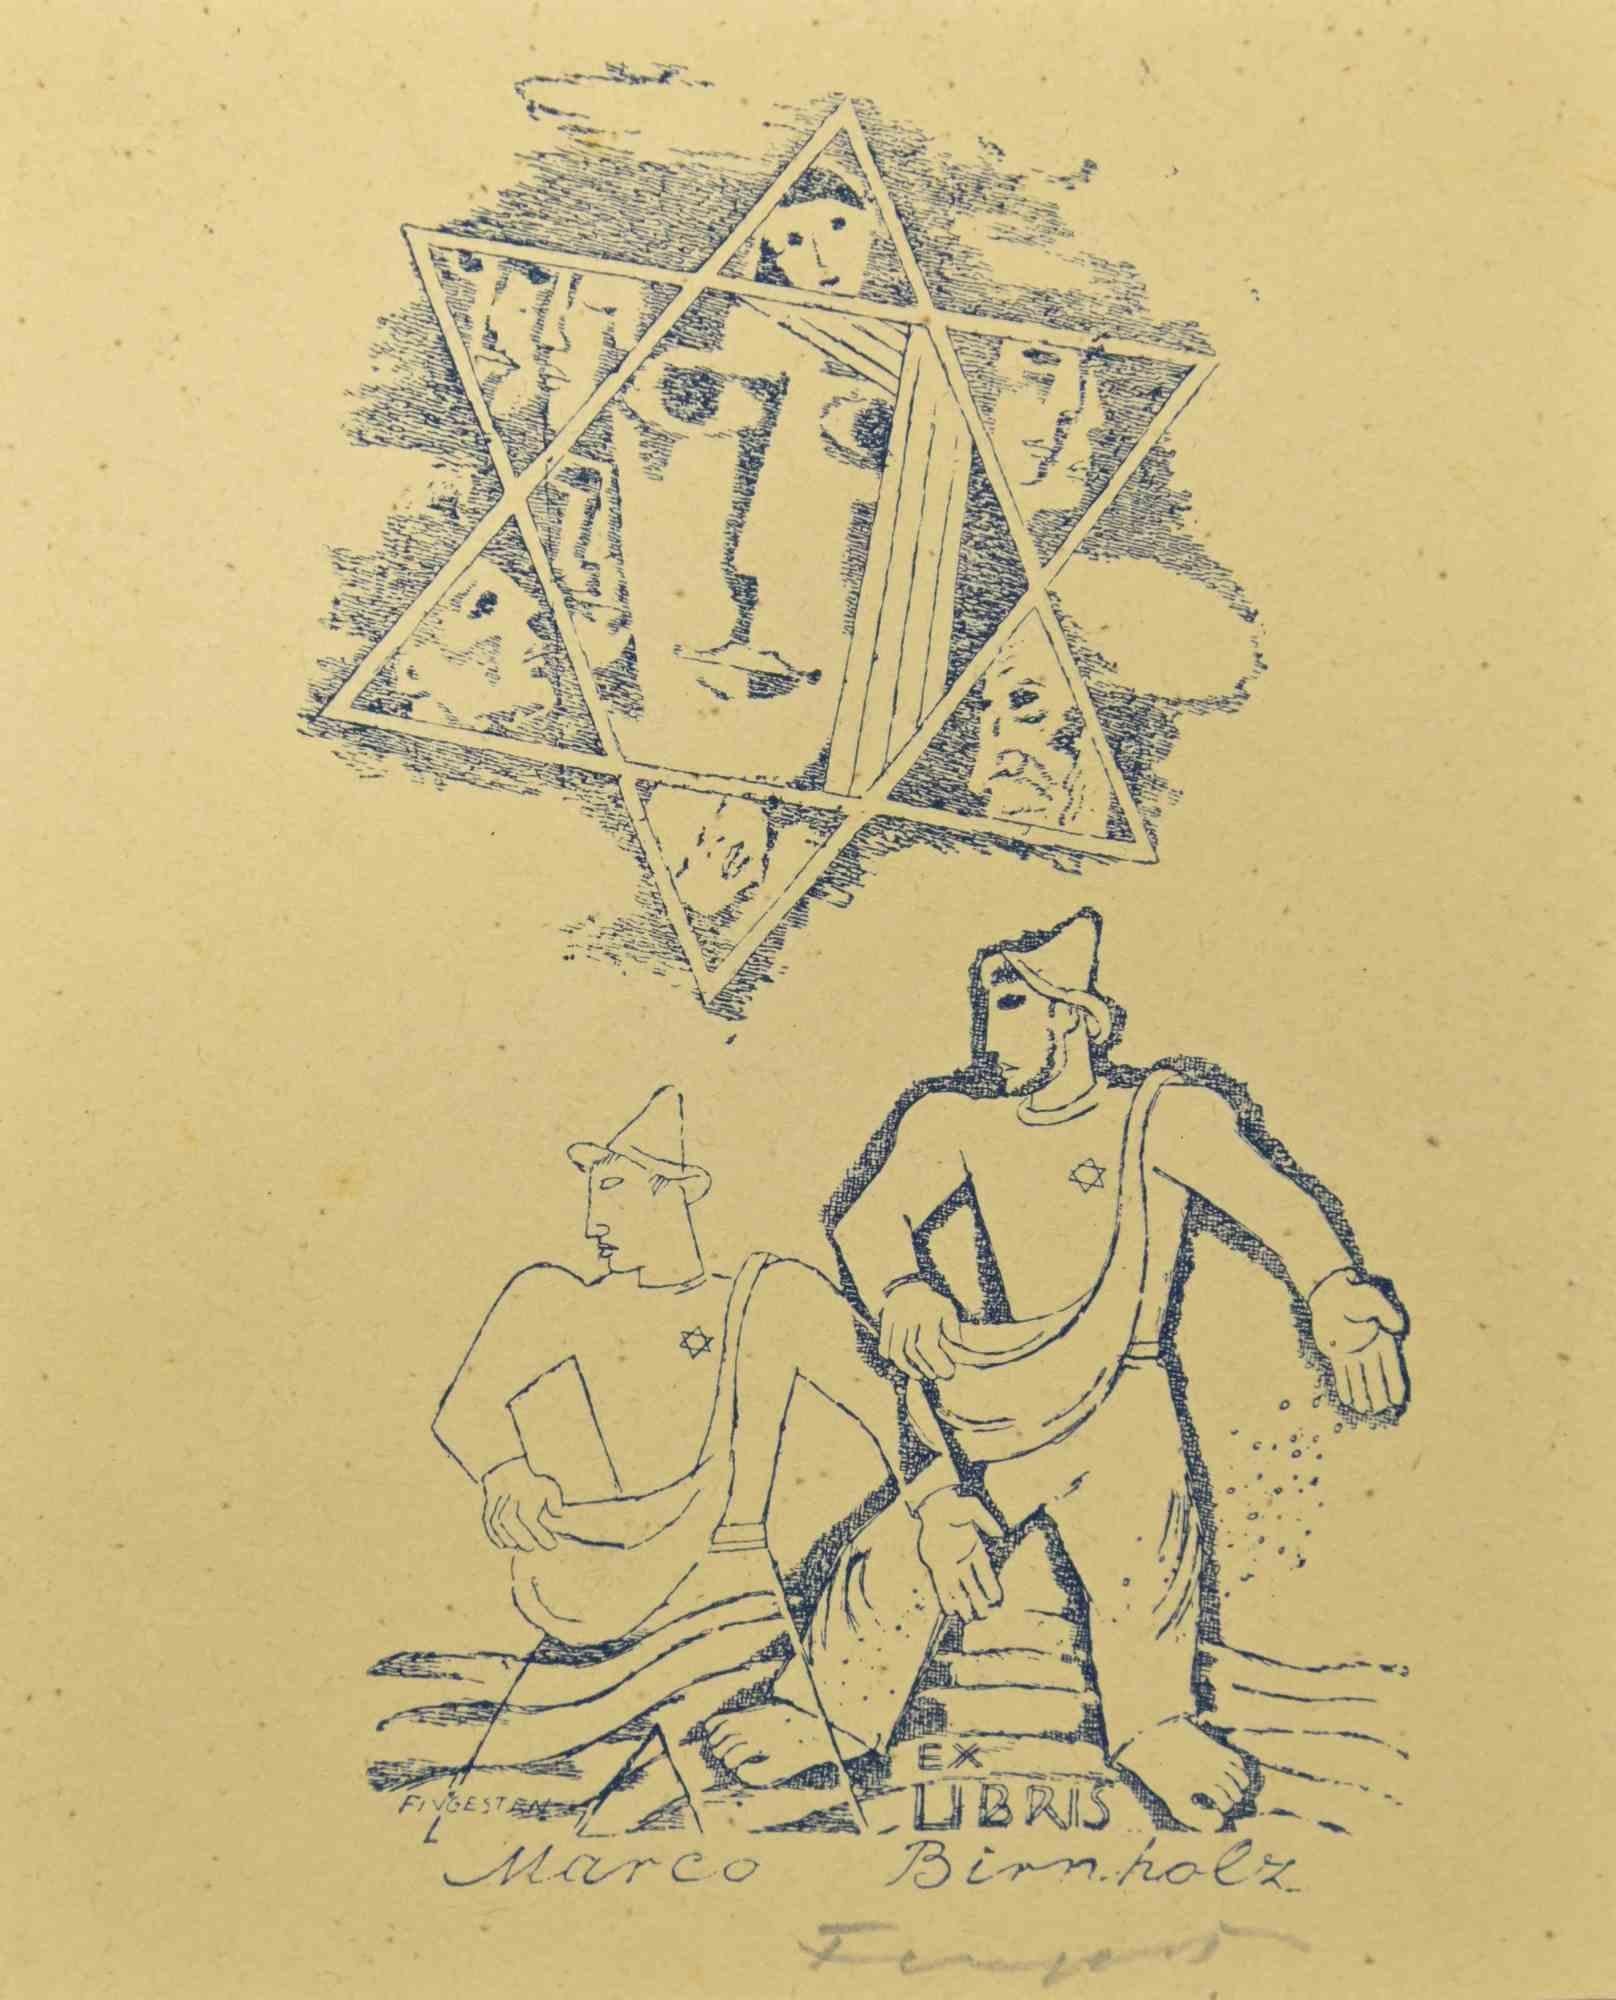 Ex Libris - Marco Binnholz is a woodcut print created by  Michel Fingesten.

Hand Signed on   the lower right margin.

Good conditions.

Michel Fingesten (1884 - 1943) was a Czech painter and engraver of Jewish origin. He is considered one of the